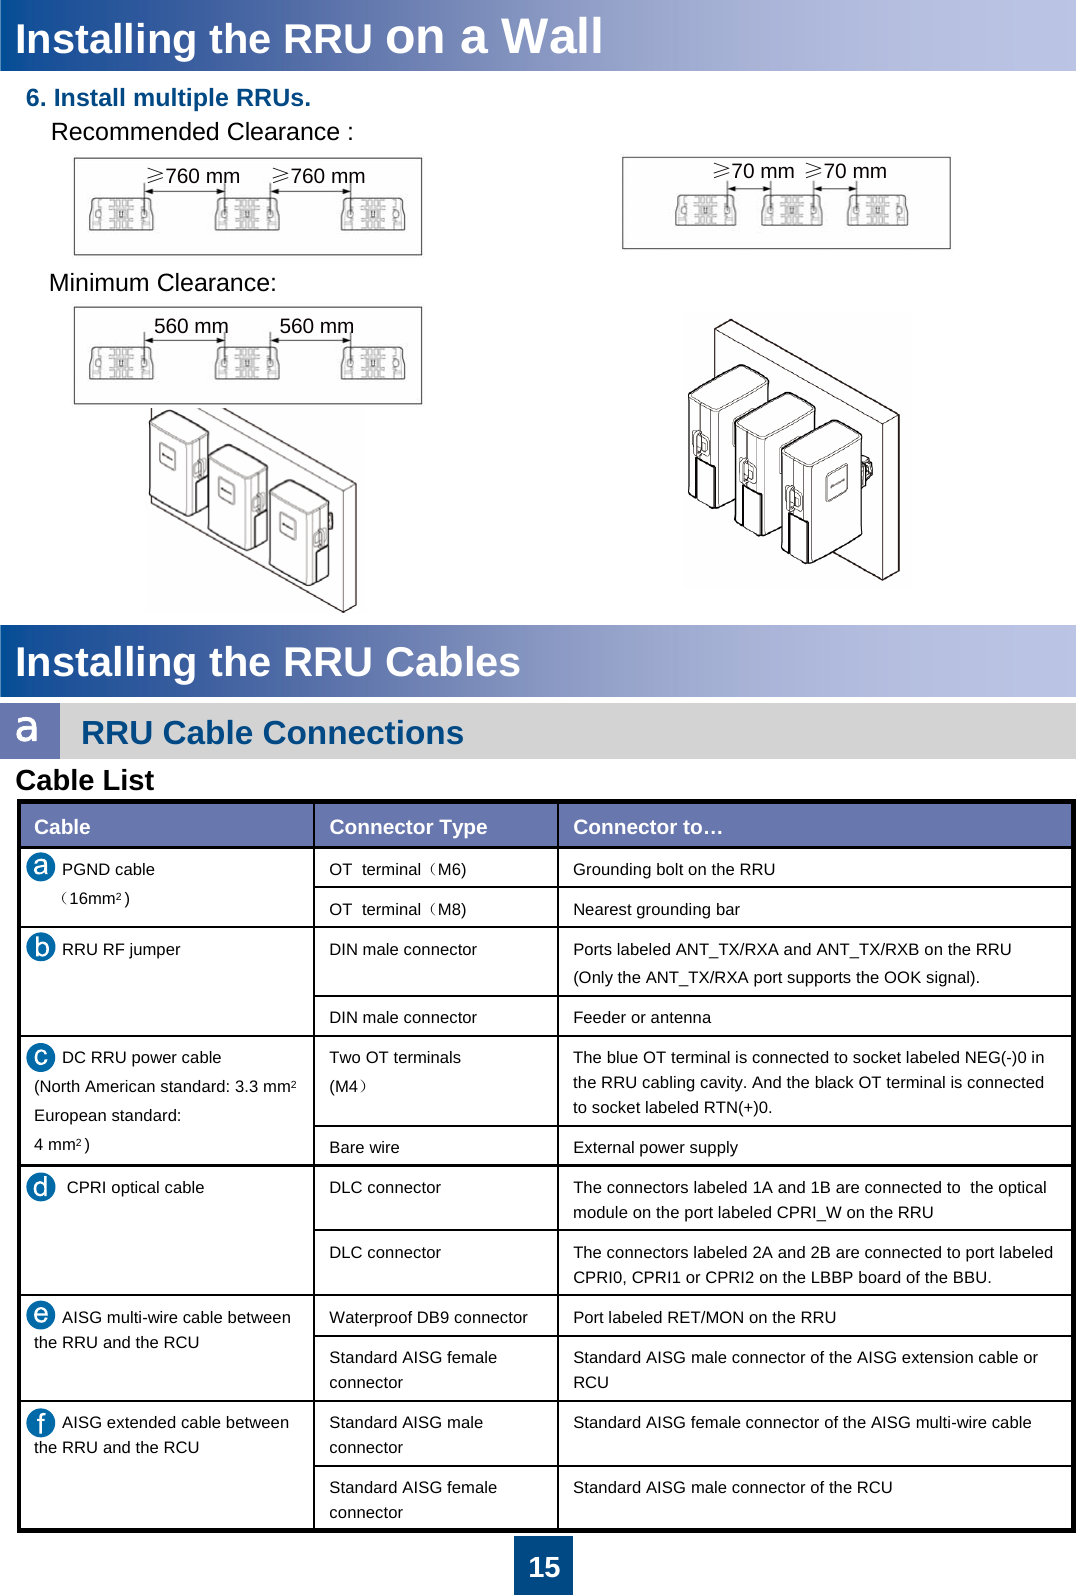 15Installing the RRU on a Wall6. Install multiple RRUs.≥70 mm560 mm 560 mm≥70 mm≥760 mm ≥760 mmMinimum Clearance:Recommended Clearance :Installing the RRU CablesRRU Cable ConnectionsaStandard AISG female connector of the AISG multi-wire cableStandard AISG male connectorStandard AISG male connector of the AISG extension cable or RCUStandard AISG female connectorPort labeled RET/MON on the RRUWaterproof DB9 connectorAISG multi-wire cable between the RRU and the RCUThe connectors labeled 2A and 2B are connected to port labeled CPRI0, CPRI1 or CPRI2 on the LBBP board of the BBU.DLC connectorCPRI optical cable The connectors labeled 1A and 1B are connected to  the optical module on the port labeled CPRI_W on the RRUDLC connectorAISG extended cable between the RRU and the RCUStandard AISG male connector of the RCUStandard AISG female connectorThe blue OT terminal is connected to socket labeled NEG(-)0 in the RRU cabling cavity. And the black OT terminal is connected to socket labeled RTN(+)0.Two OT terminals(M4）DC RRU power cable(North American standard: 3.3 mm2 European standard: 4 mm2 )External power supplyBare wireFeeder or antennaDIN male connectorPorts labeled ANT_TX/RXA and ANT_TX/RXB on the RRU(Only the ANT_TX/RXA port supports the OOK signal).DIN male connectorRRU RF jumperNearest grounding barOT  terminal（M8)Grounding bolt on the RRUOT  terminal（M6)PGND cable（16mm2 )Connector to…Connector TypeCableCable List